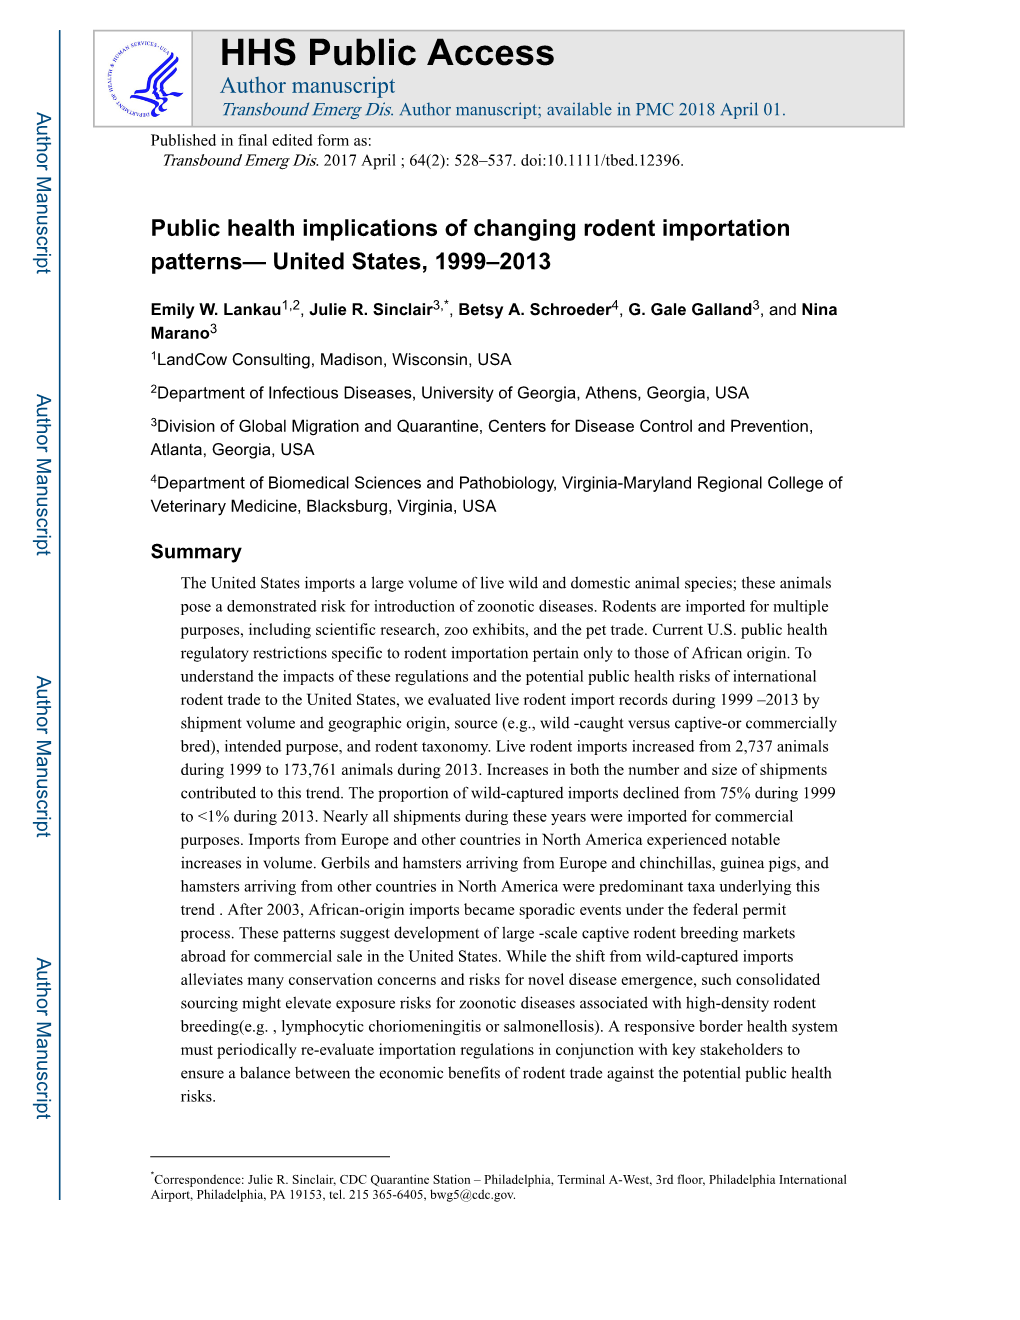 Public Health Implications of Changing Rodent Importation Patterns— United States, 1999–2013